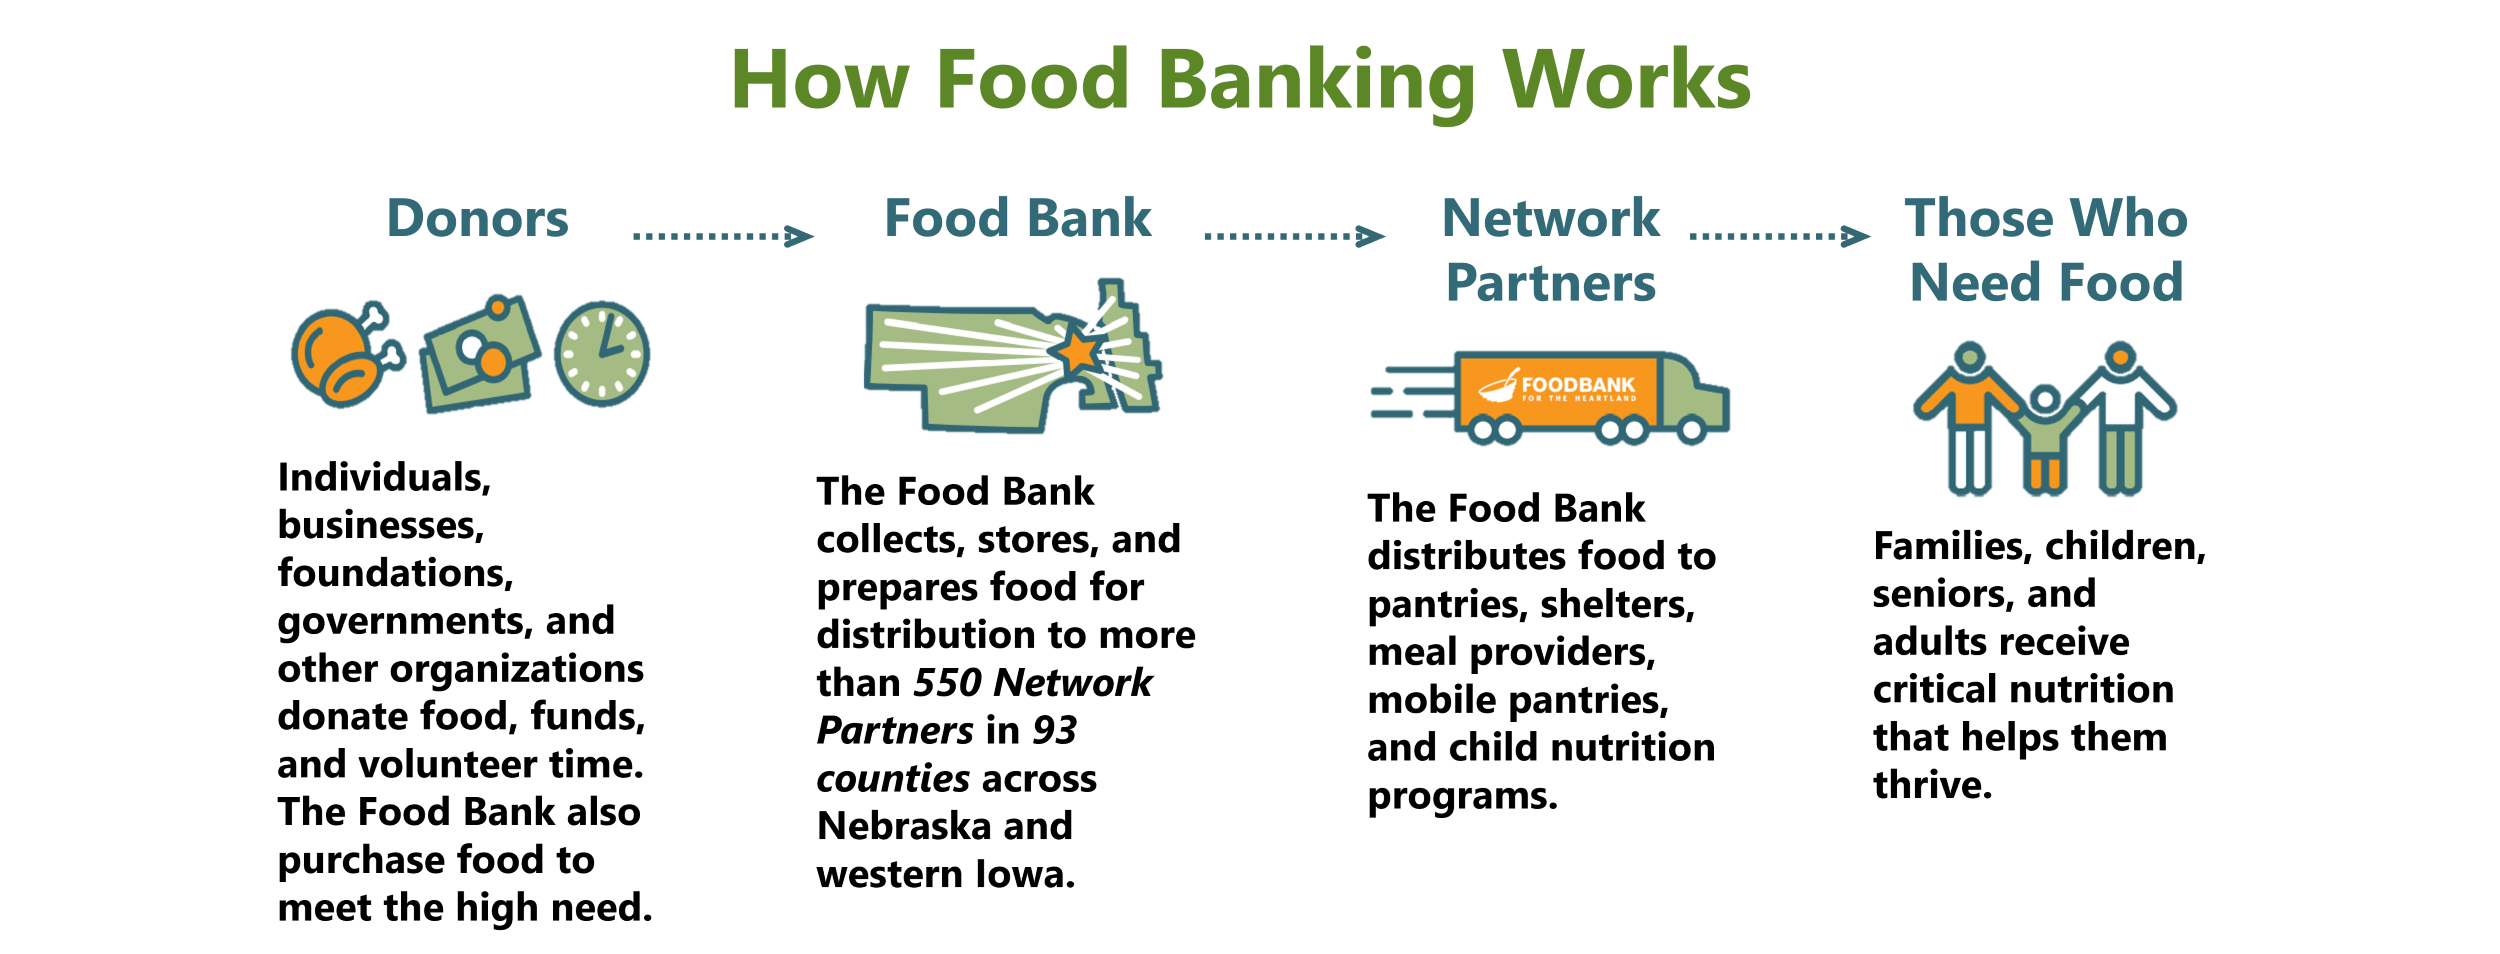 How food banking works